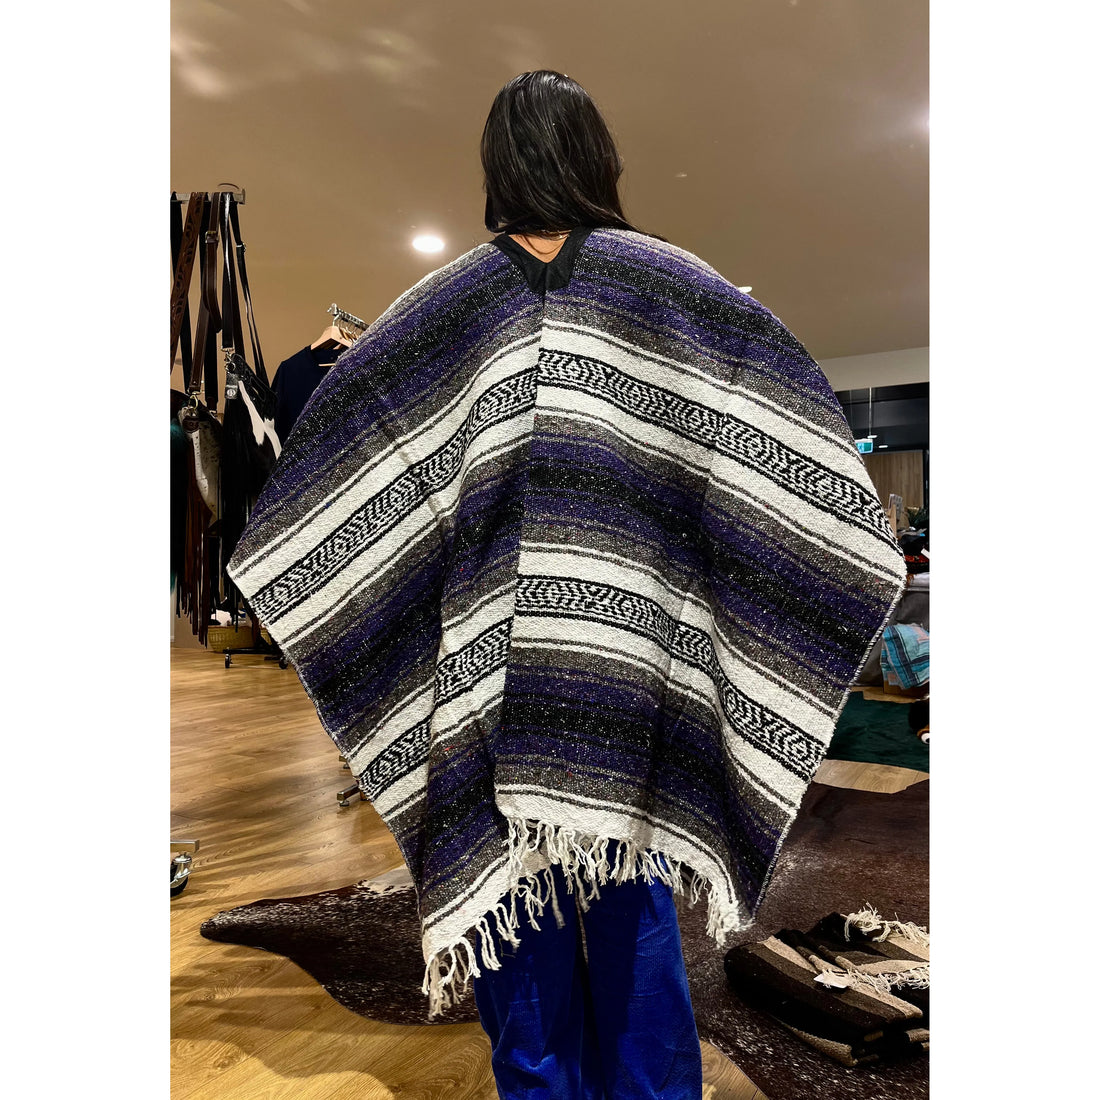 Clint Eastwood style Poncho